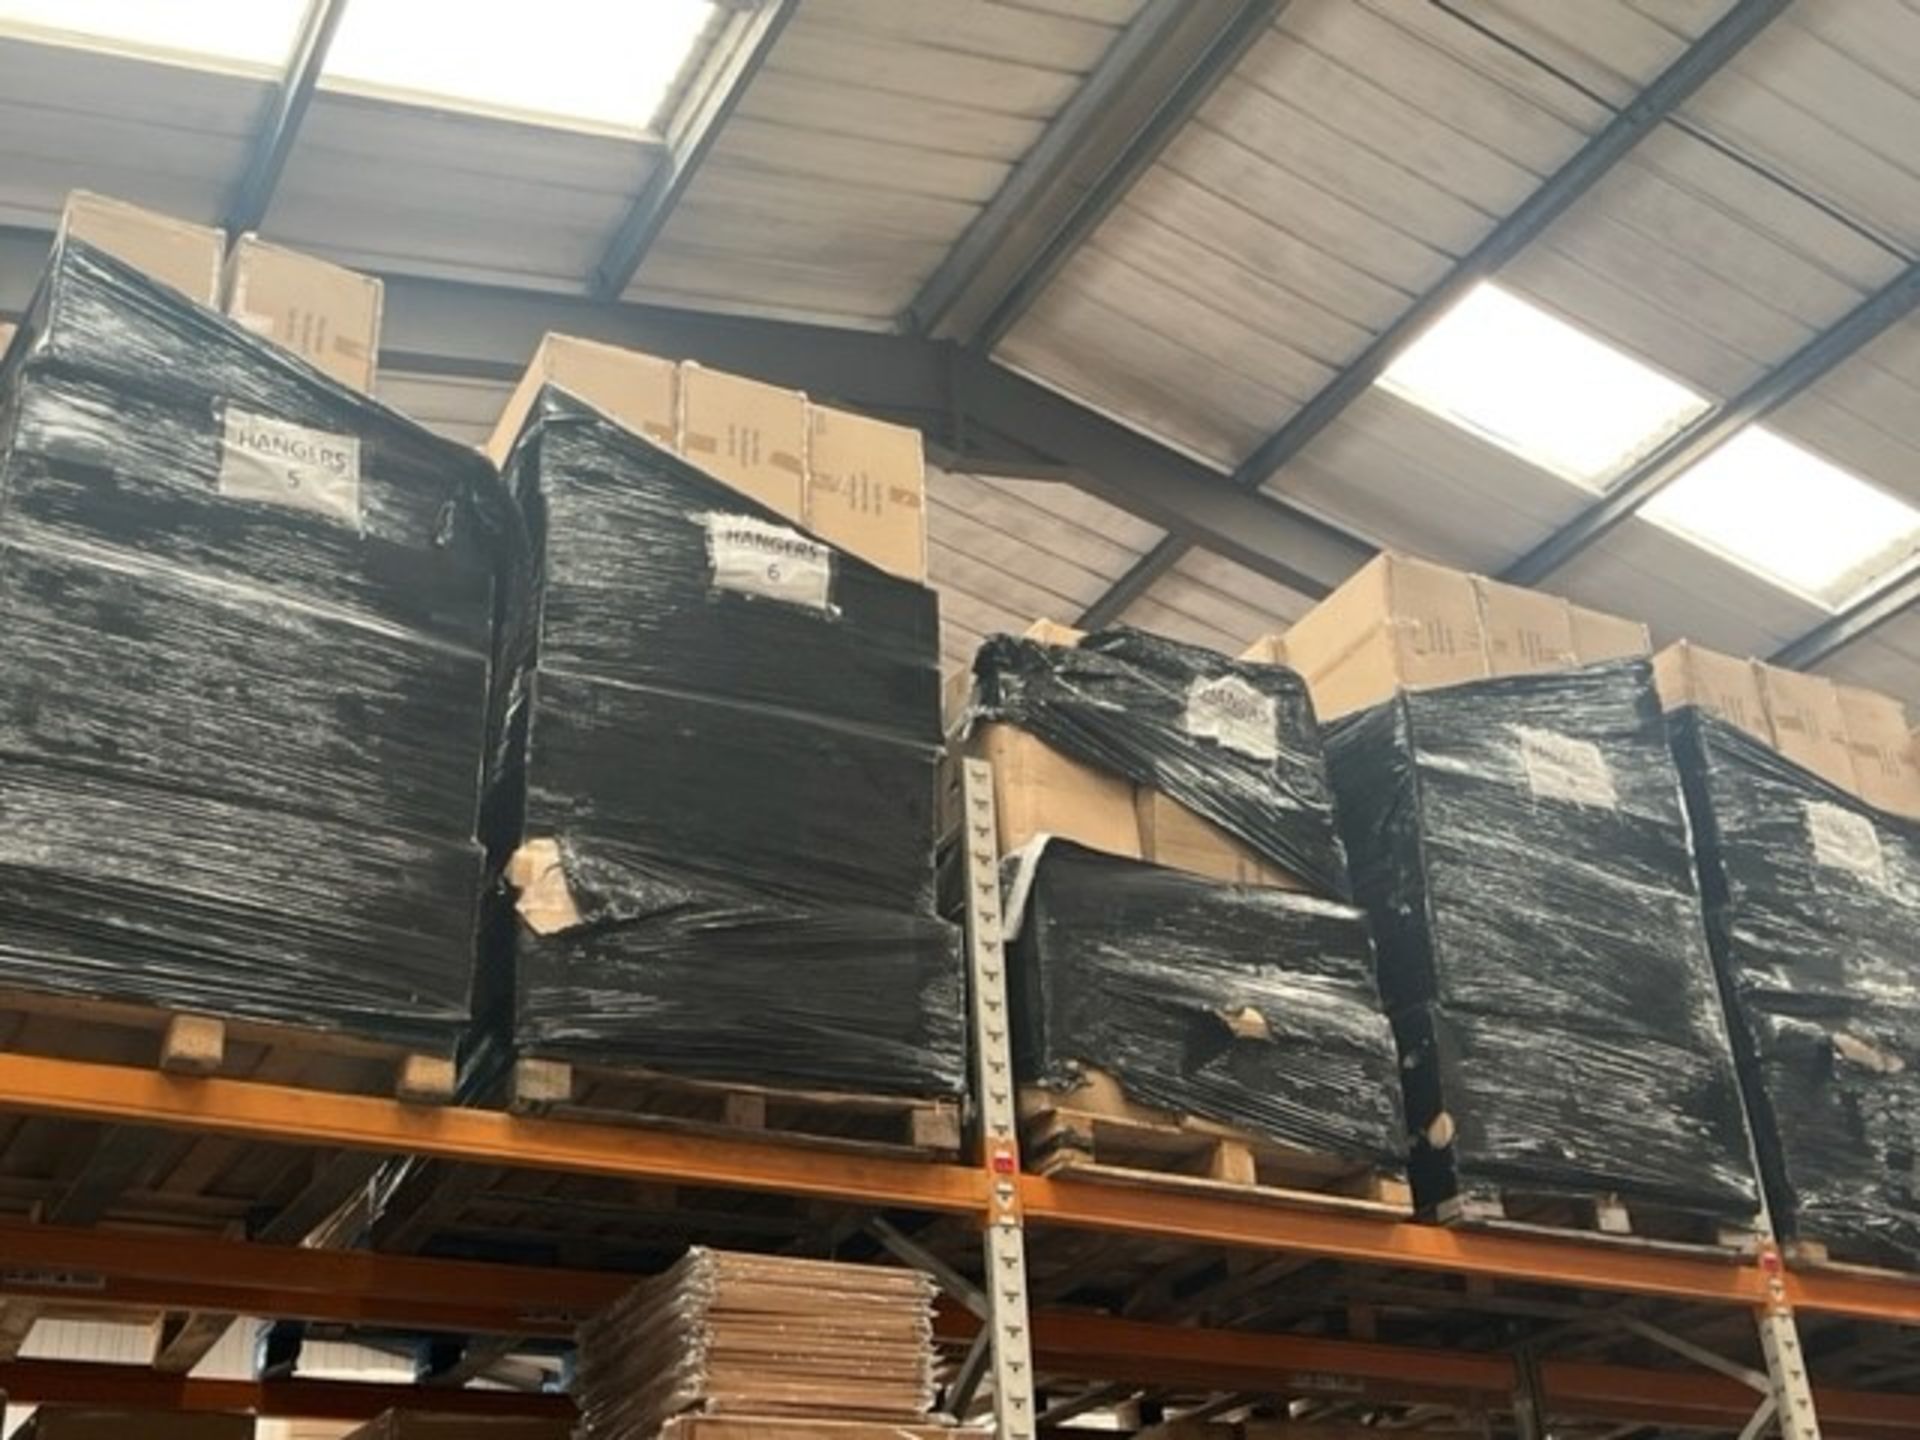 1 PALLET OF 2800 X WOODEN SECURITY COATHANGERS DARK WOOD WITH NON-SLIP TROUSER BAR. - Image 4 of 4